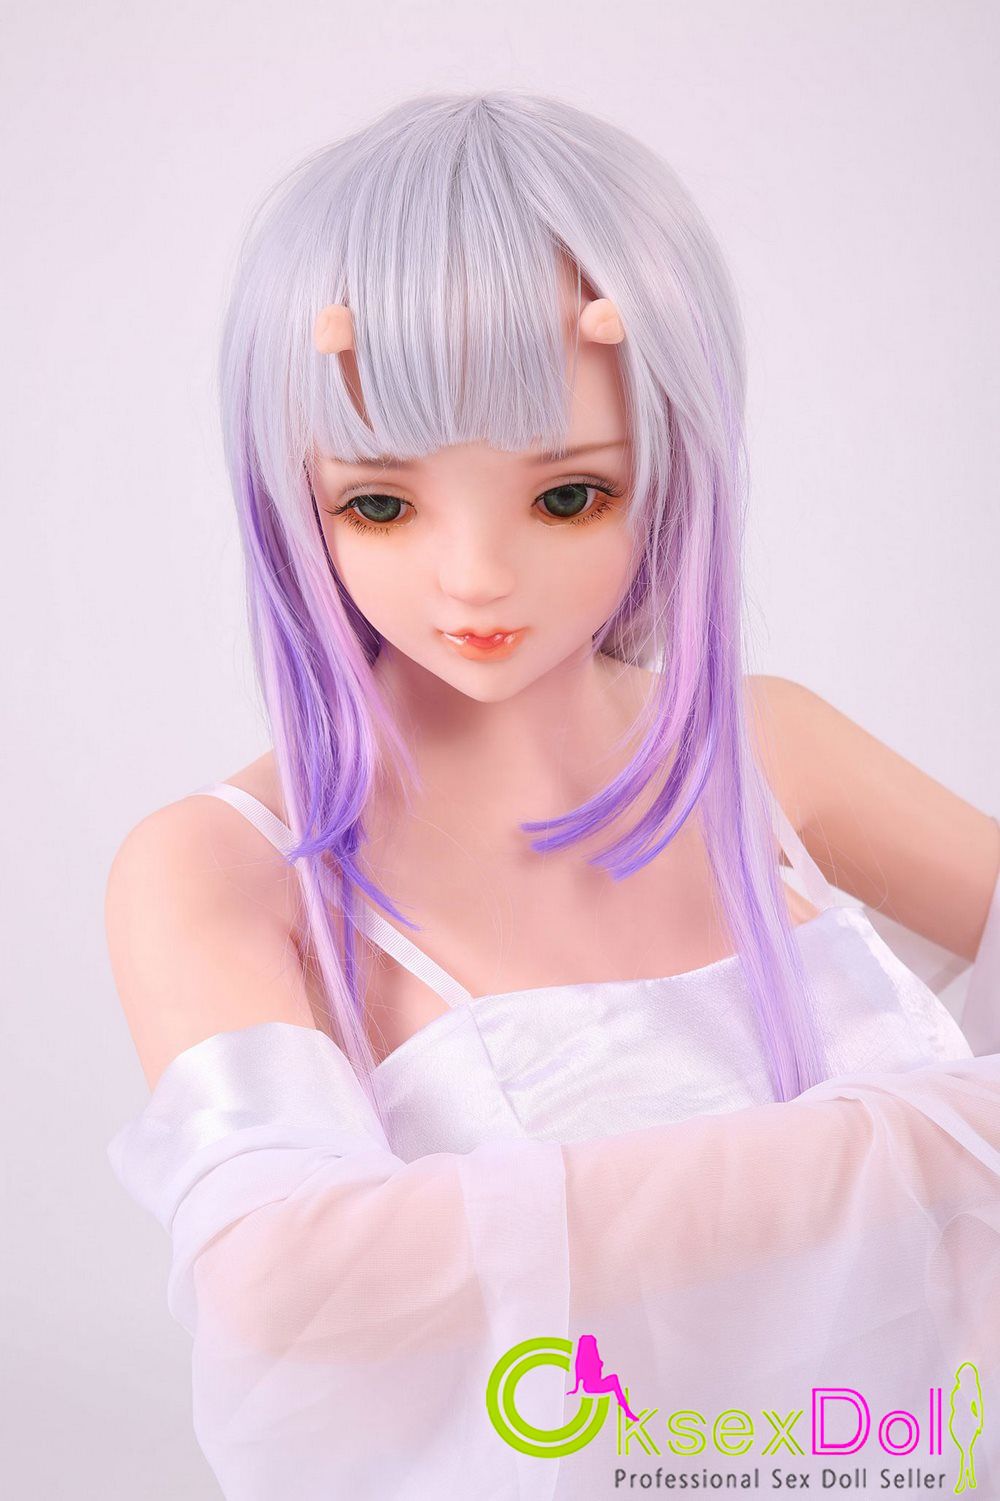 Blue Eyes love dolls Pictures